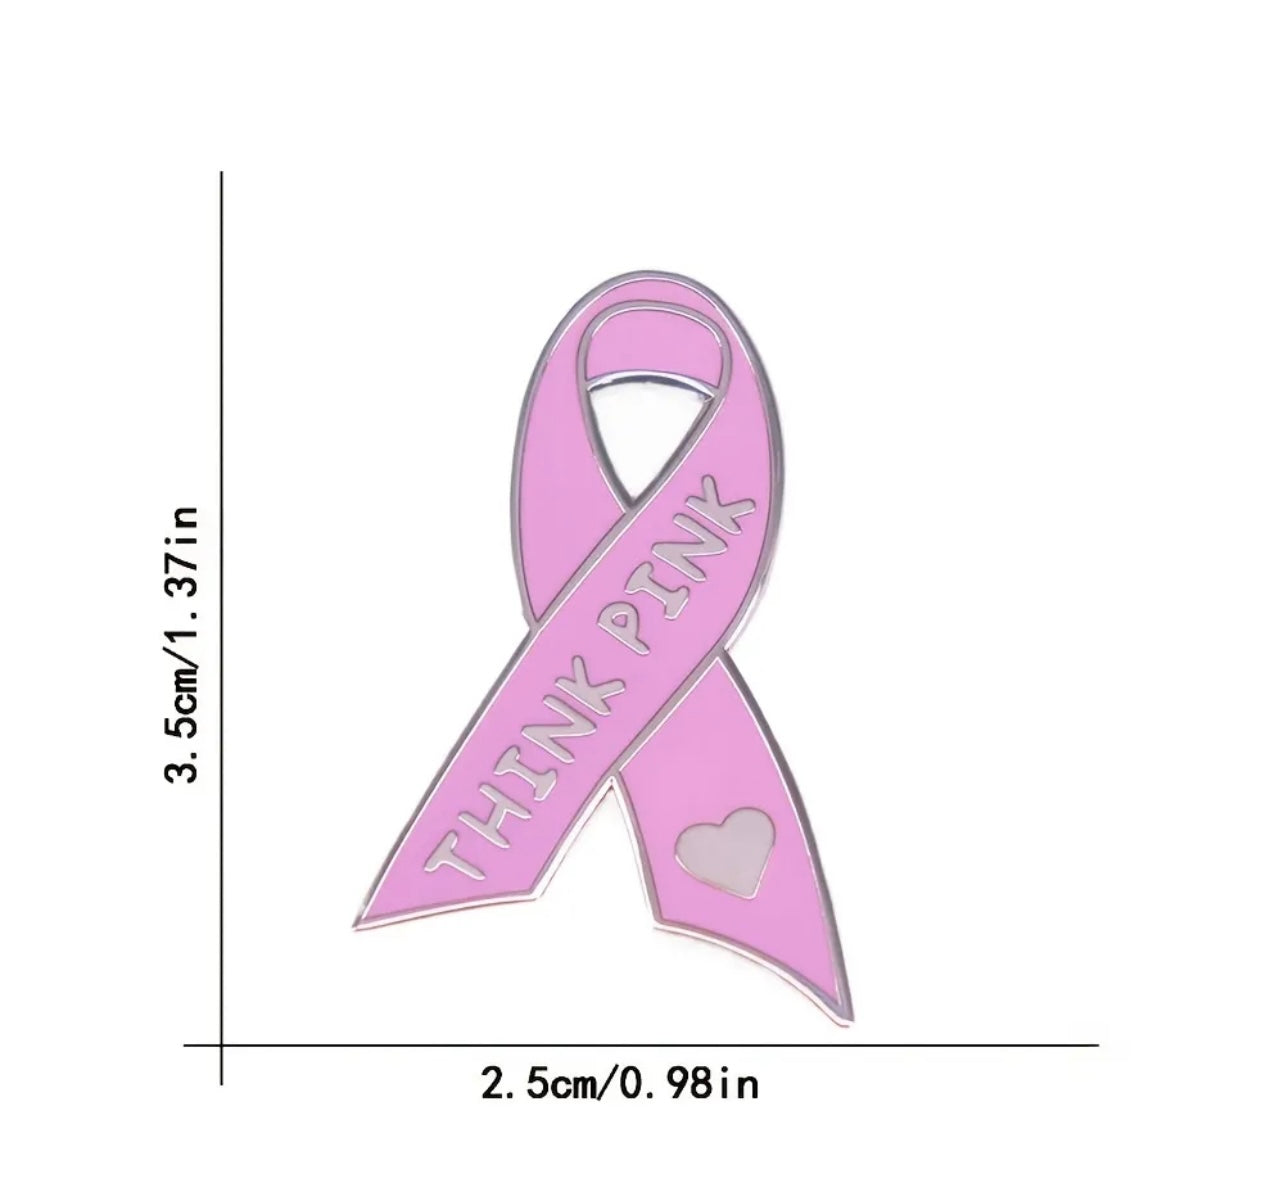 Think Pink Breast Cancer Awareness Pin